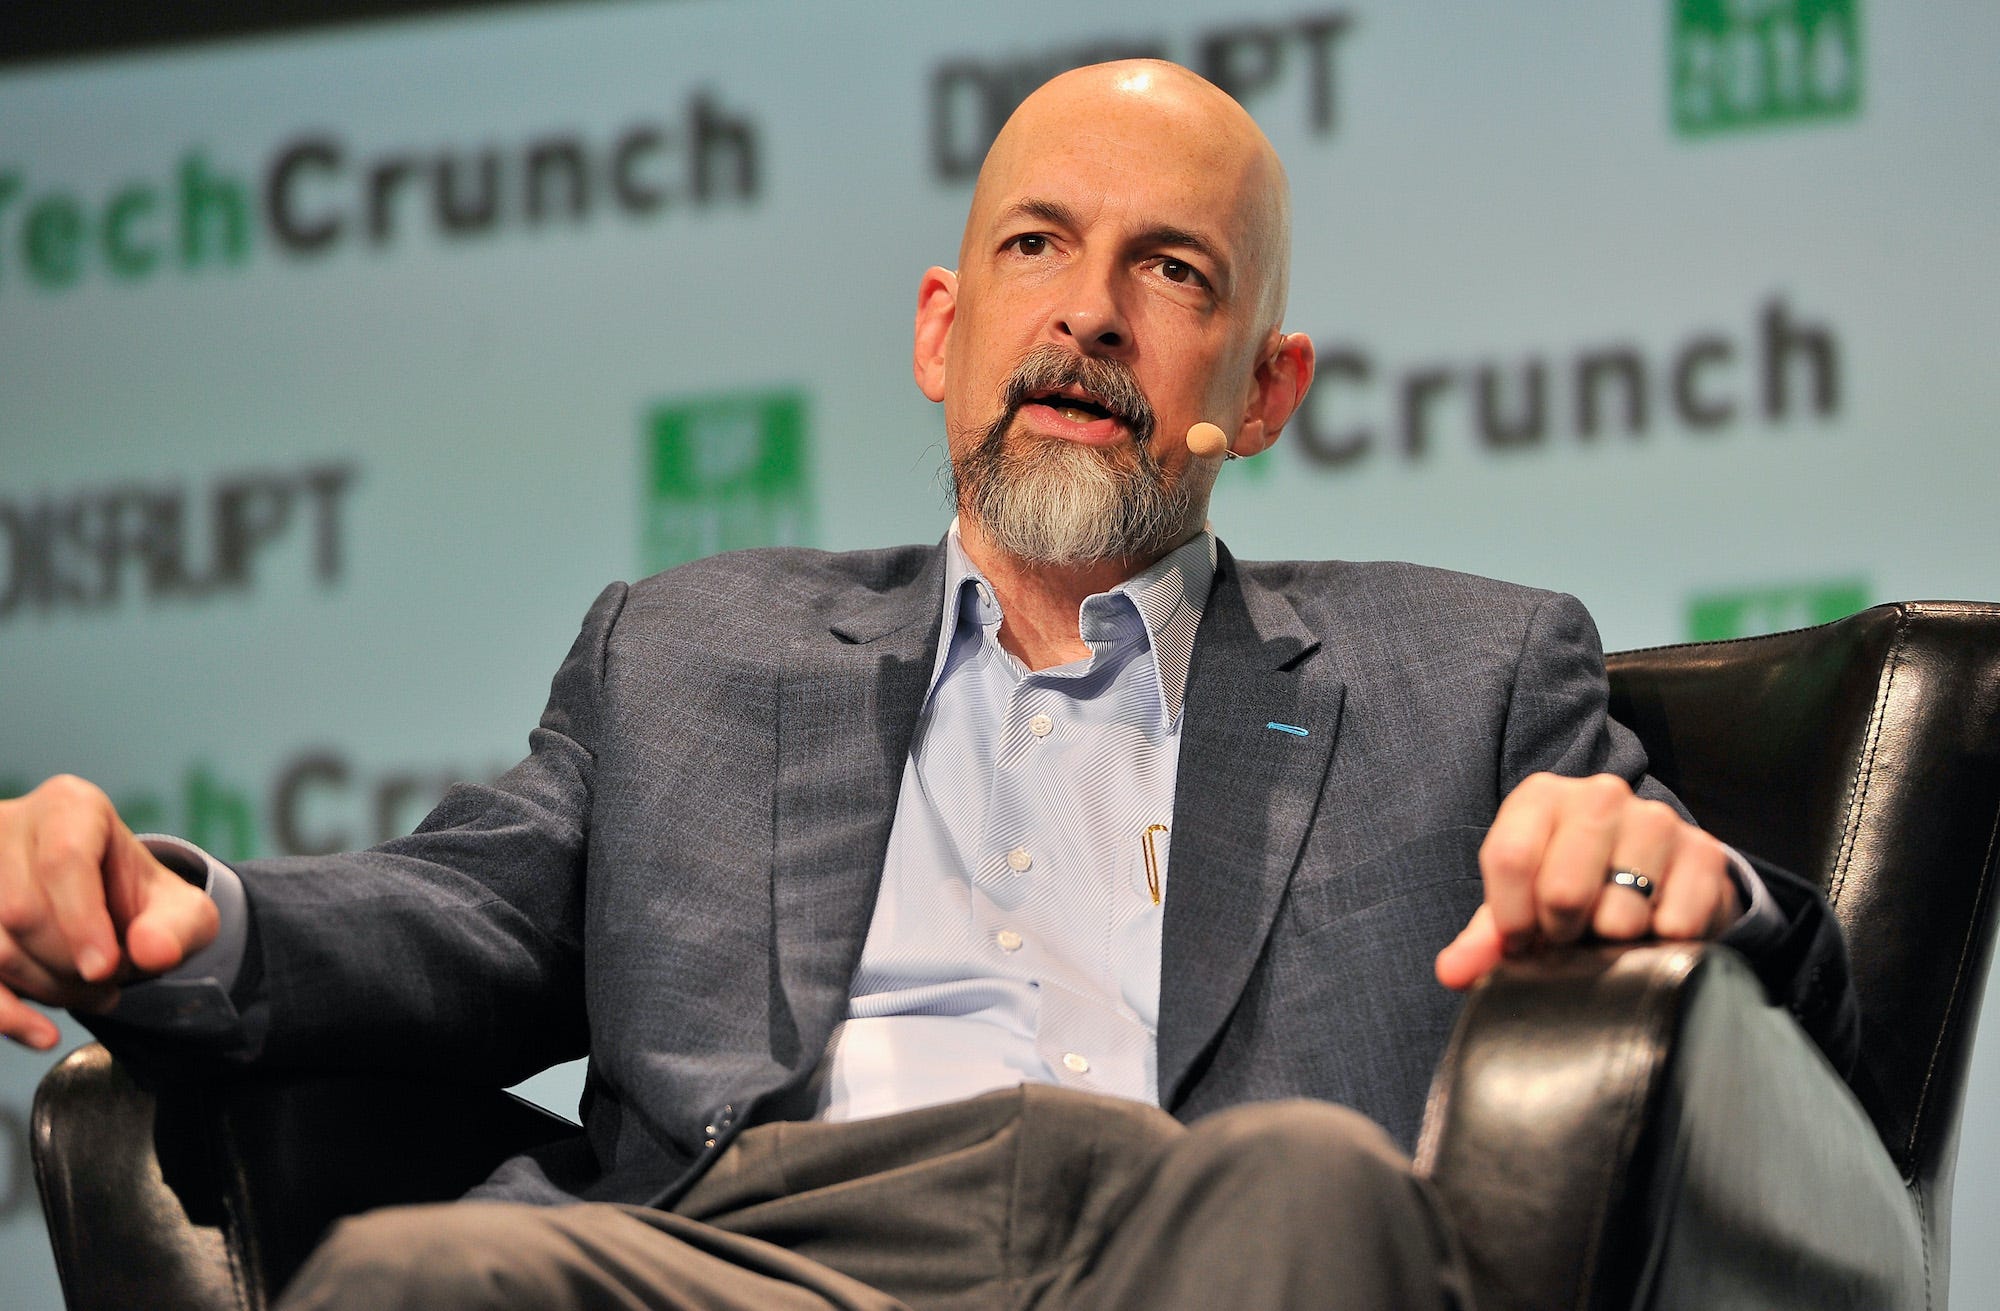 Metaverse: Why Neal Stephenson desires to construct a digital world open to all